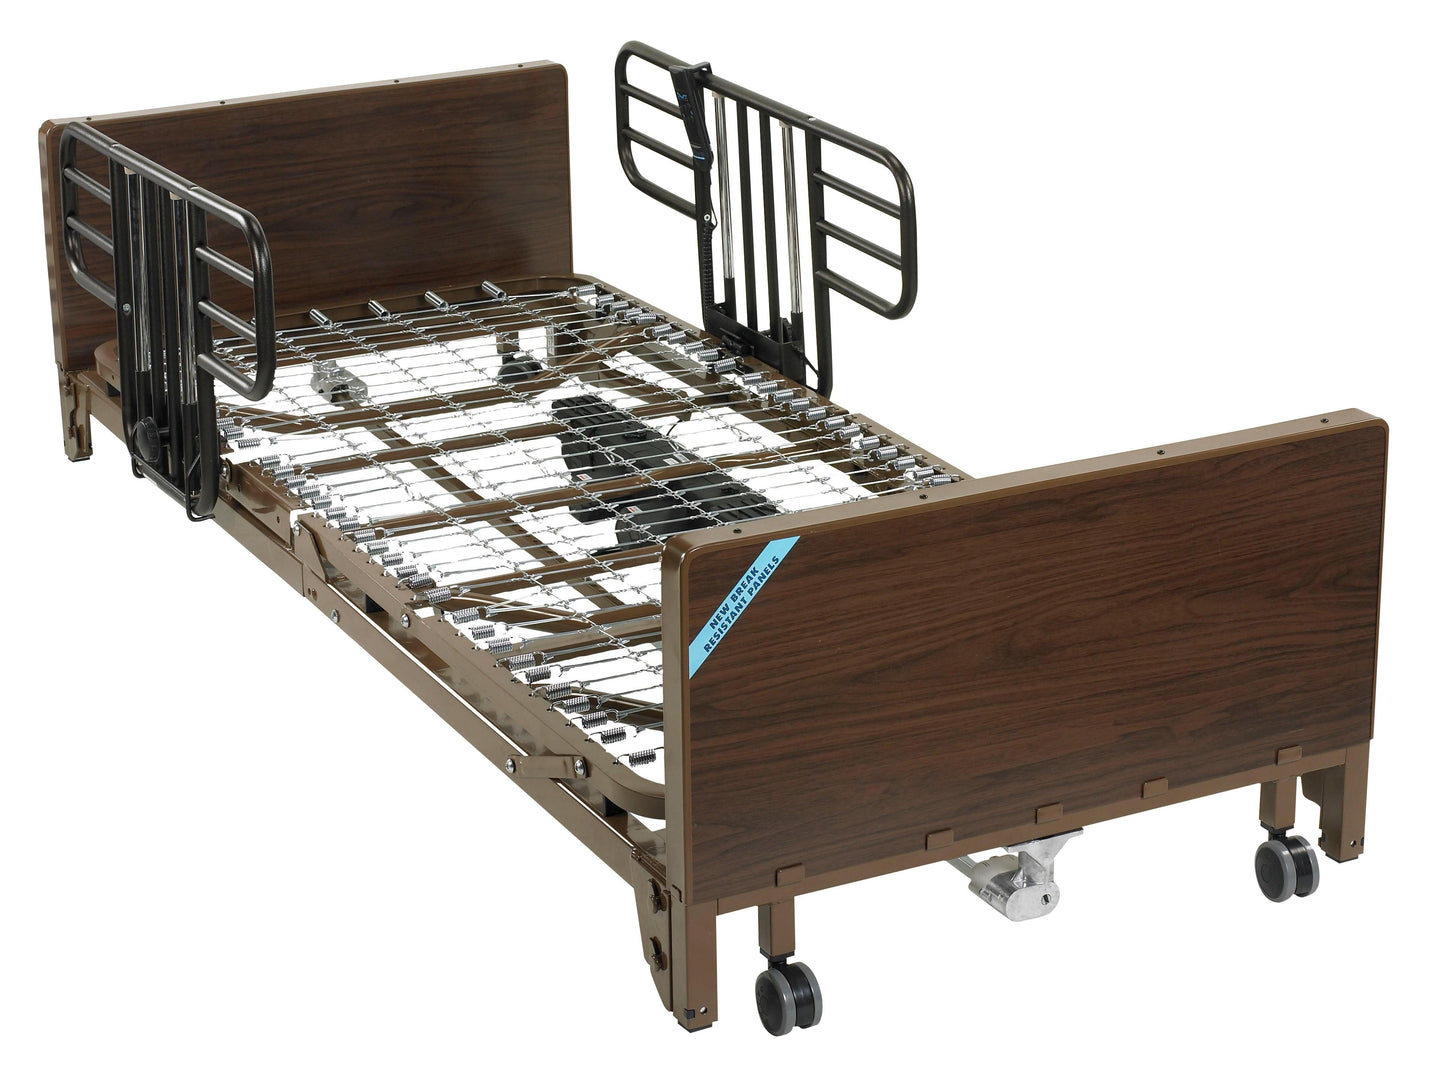 Delta Ultra Light Full Electric Low Hospital Bed